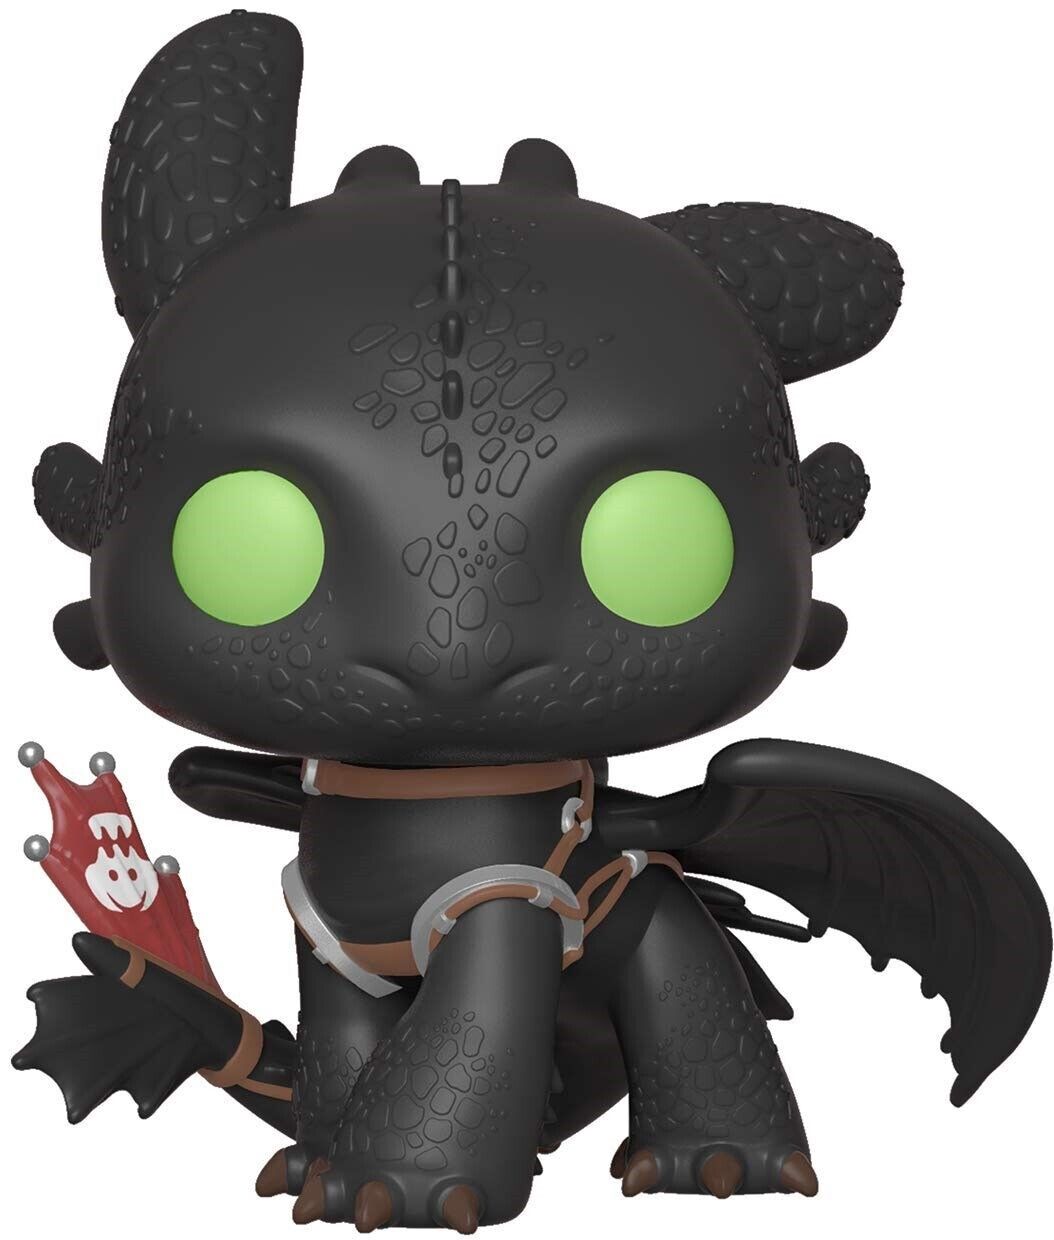 Dragon Trainer - POP! Toothless 686